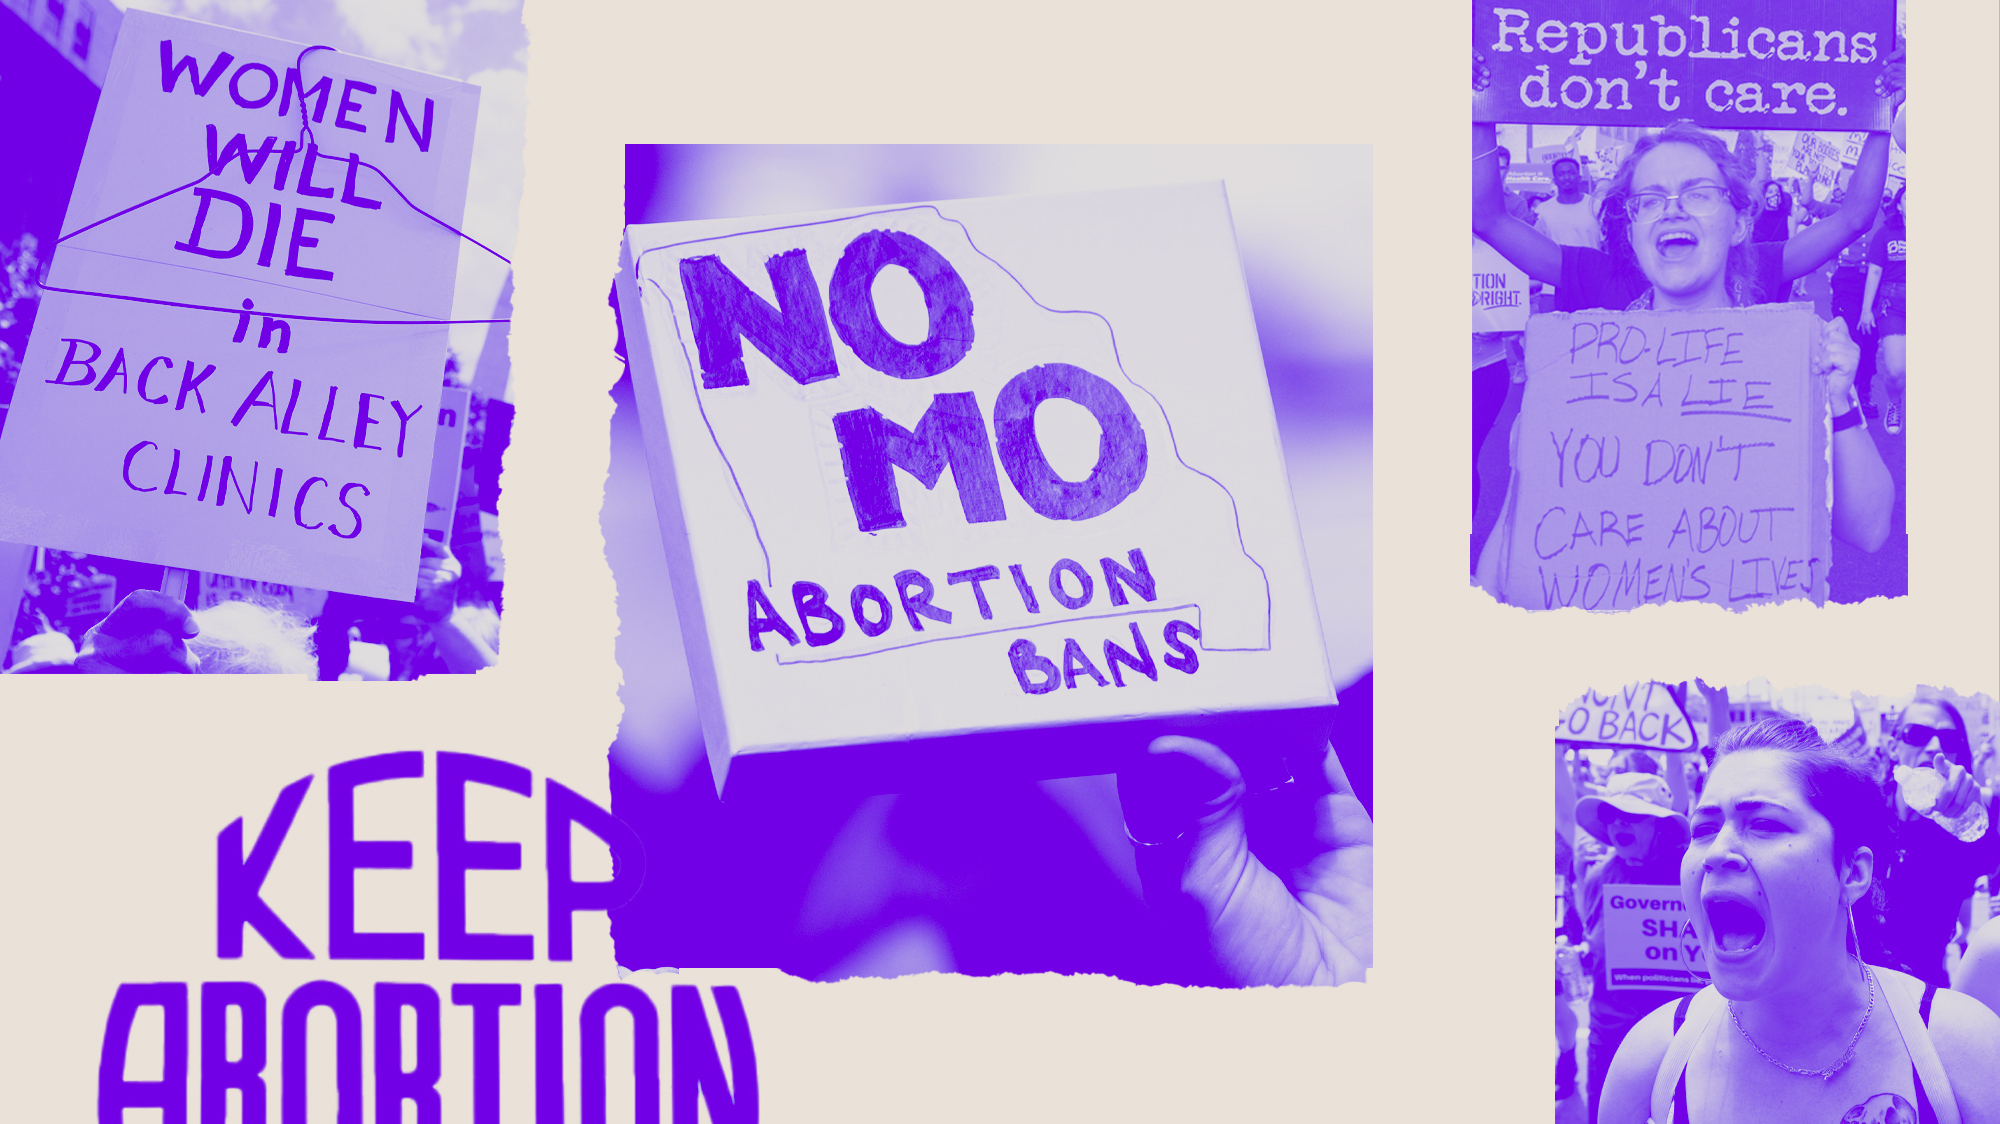 A collage of four photos from pro-abortion protests. The photo on the far left shows a clothes hanger attached to a sign that reads, 'Women will die in back alley clinics.' The photo at the center reads, 'No mo abortion bans' within an outline of the state of Missouri.' A photo on the far right has two women holding signs. One sign reads, 'Republicans don't care.' And, the other sign reads, 'Pro-life is a lie. You don't care about women's lives.’ And, the bottom right photo features a close-up of a woman marching for abortion rights. At the lower left of the collage is the sign, ‘Keep abortion legal.’